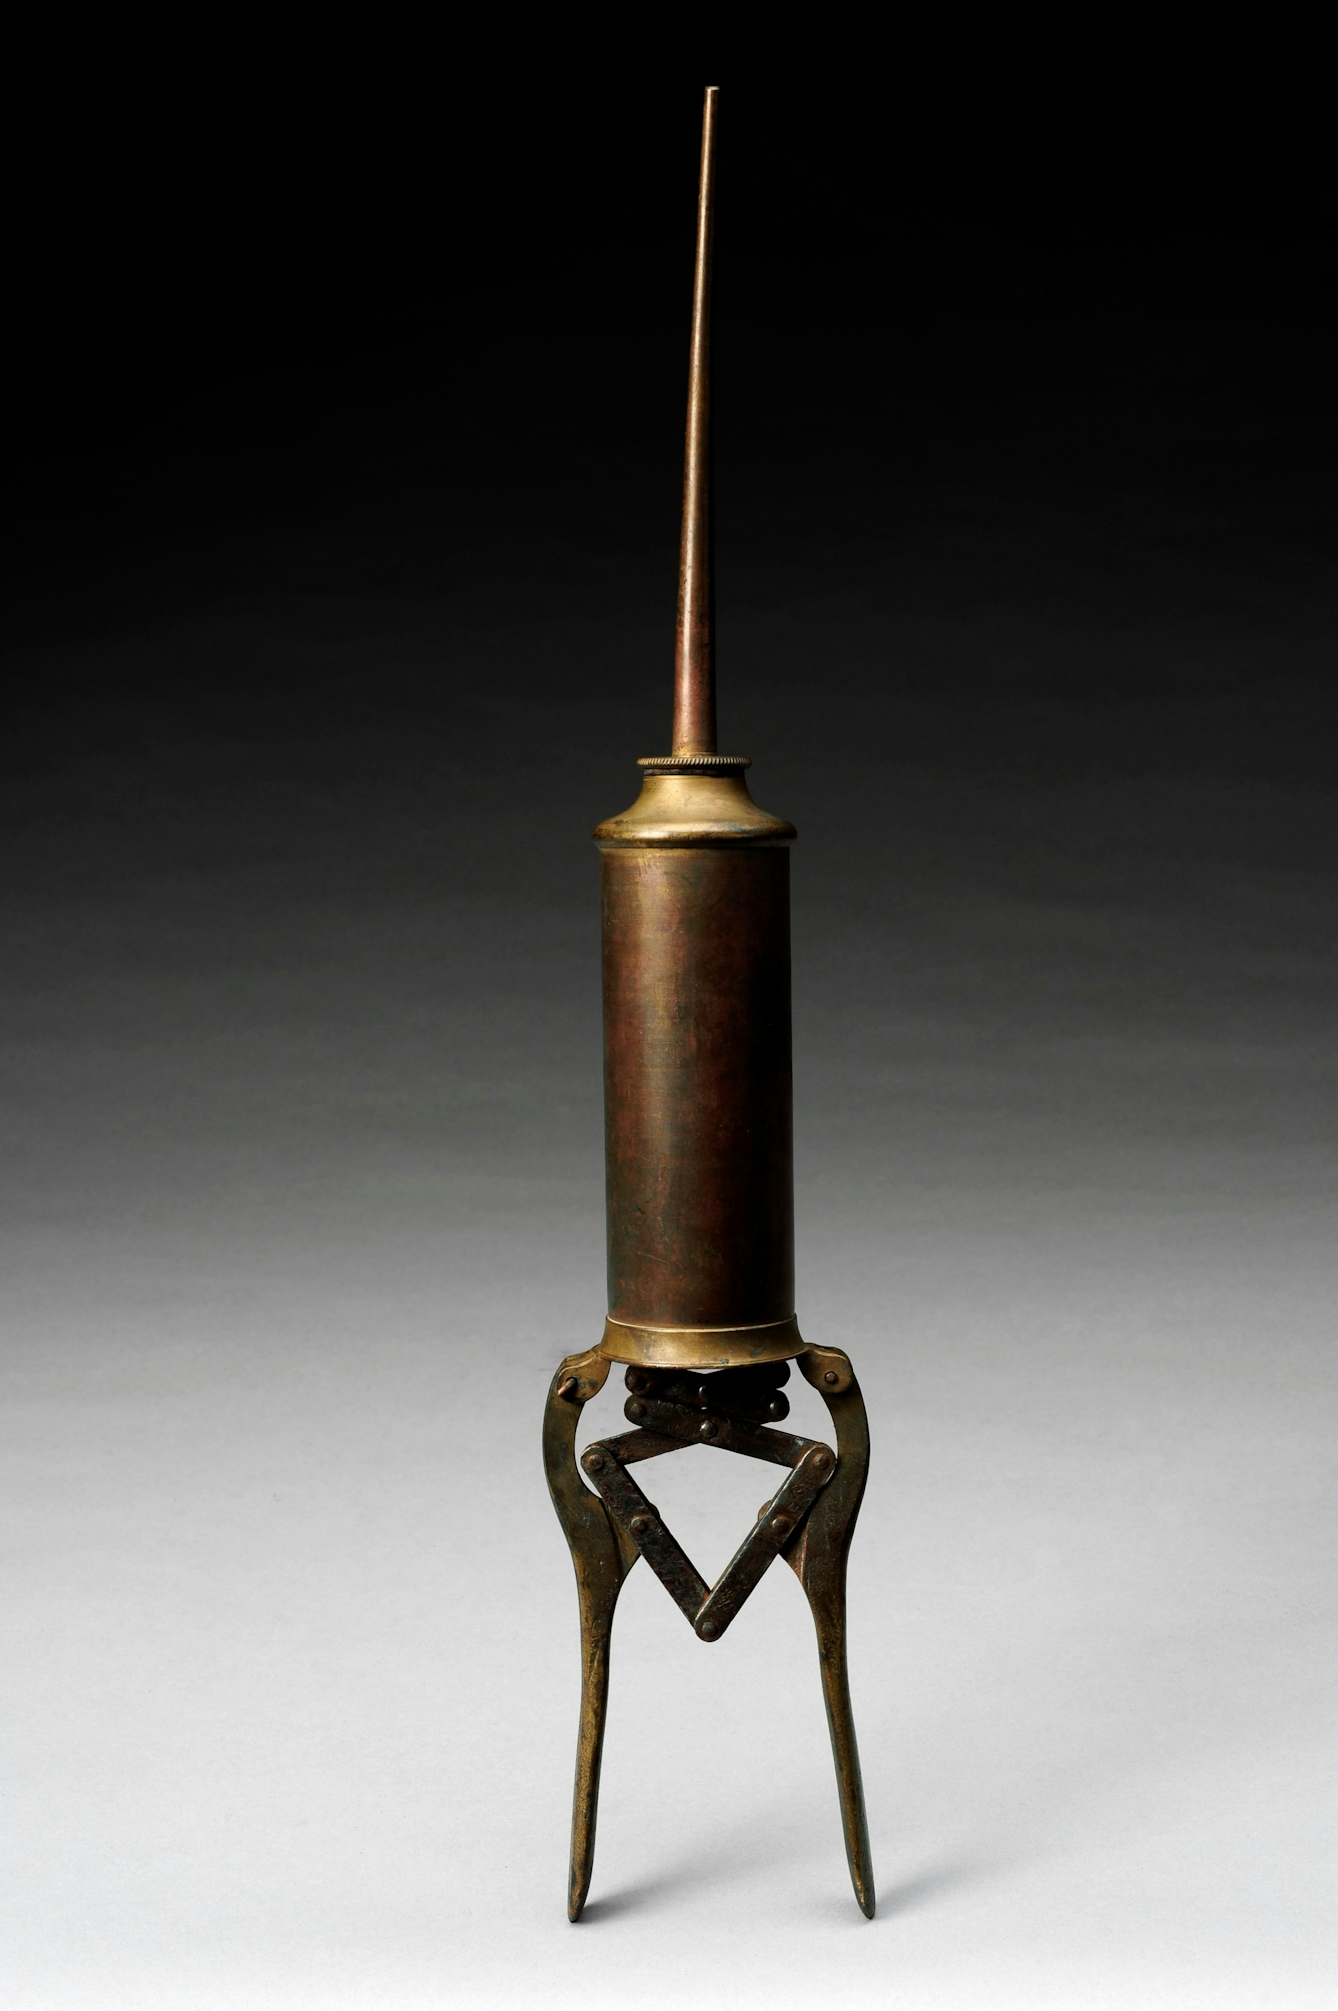 Photograph of a brass enema syringe standing vertically on a background that graduates from white at the bottom of the frame to black at the top.